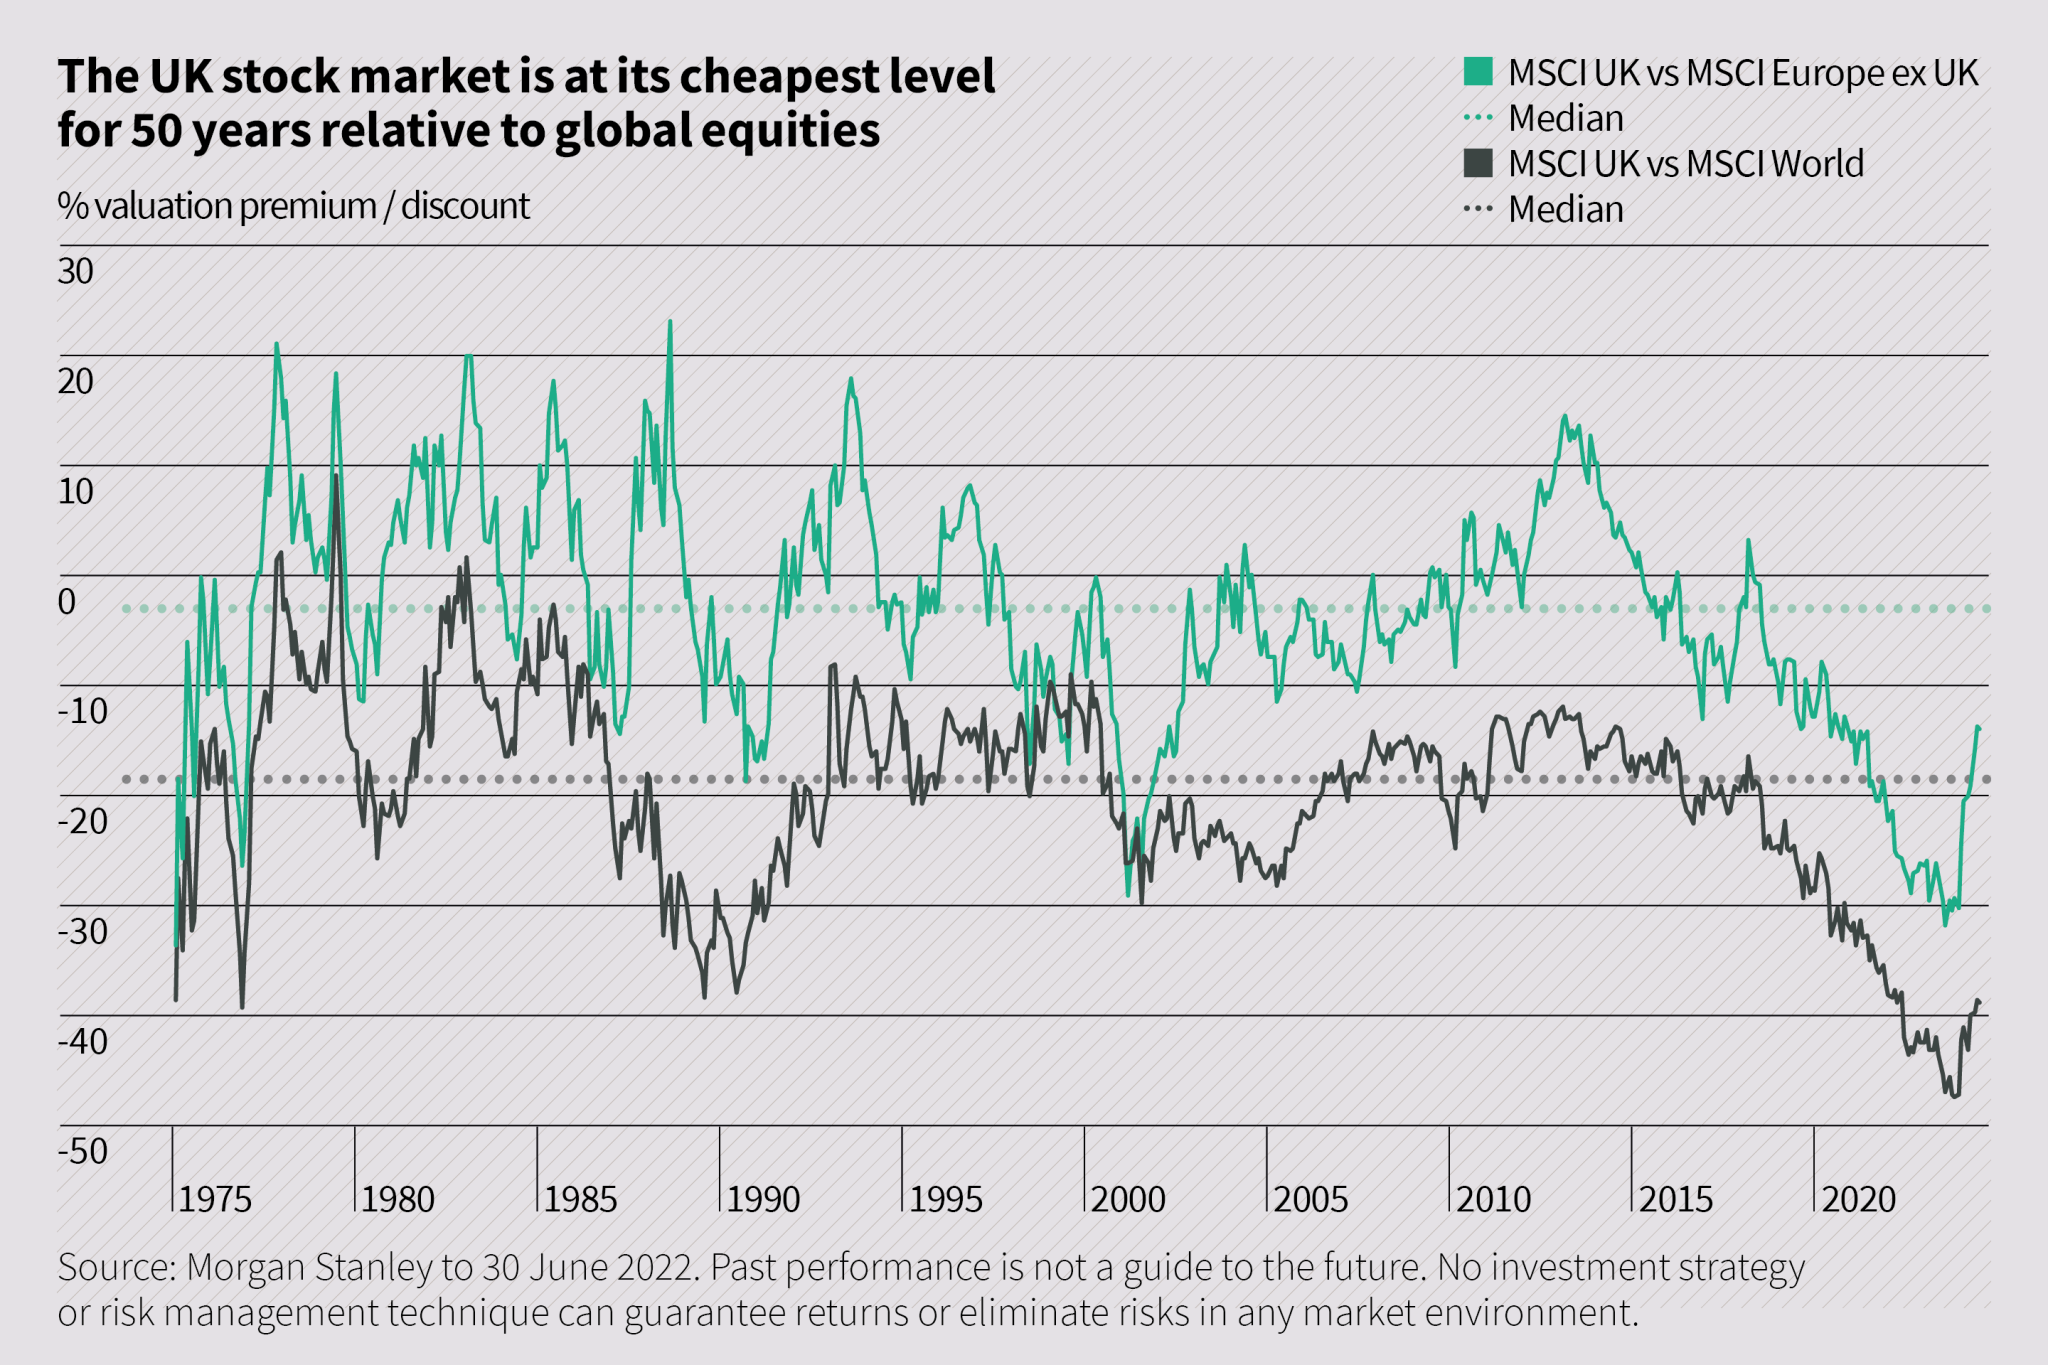 The UK stock market is at its cheapest level for 50 years relative to global equities